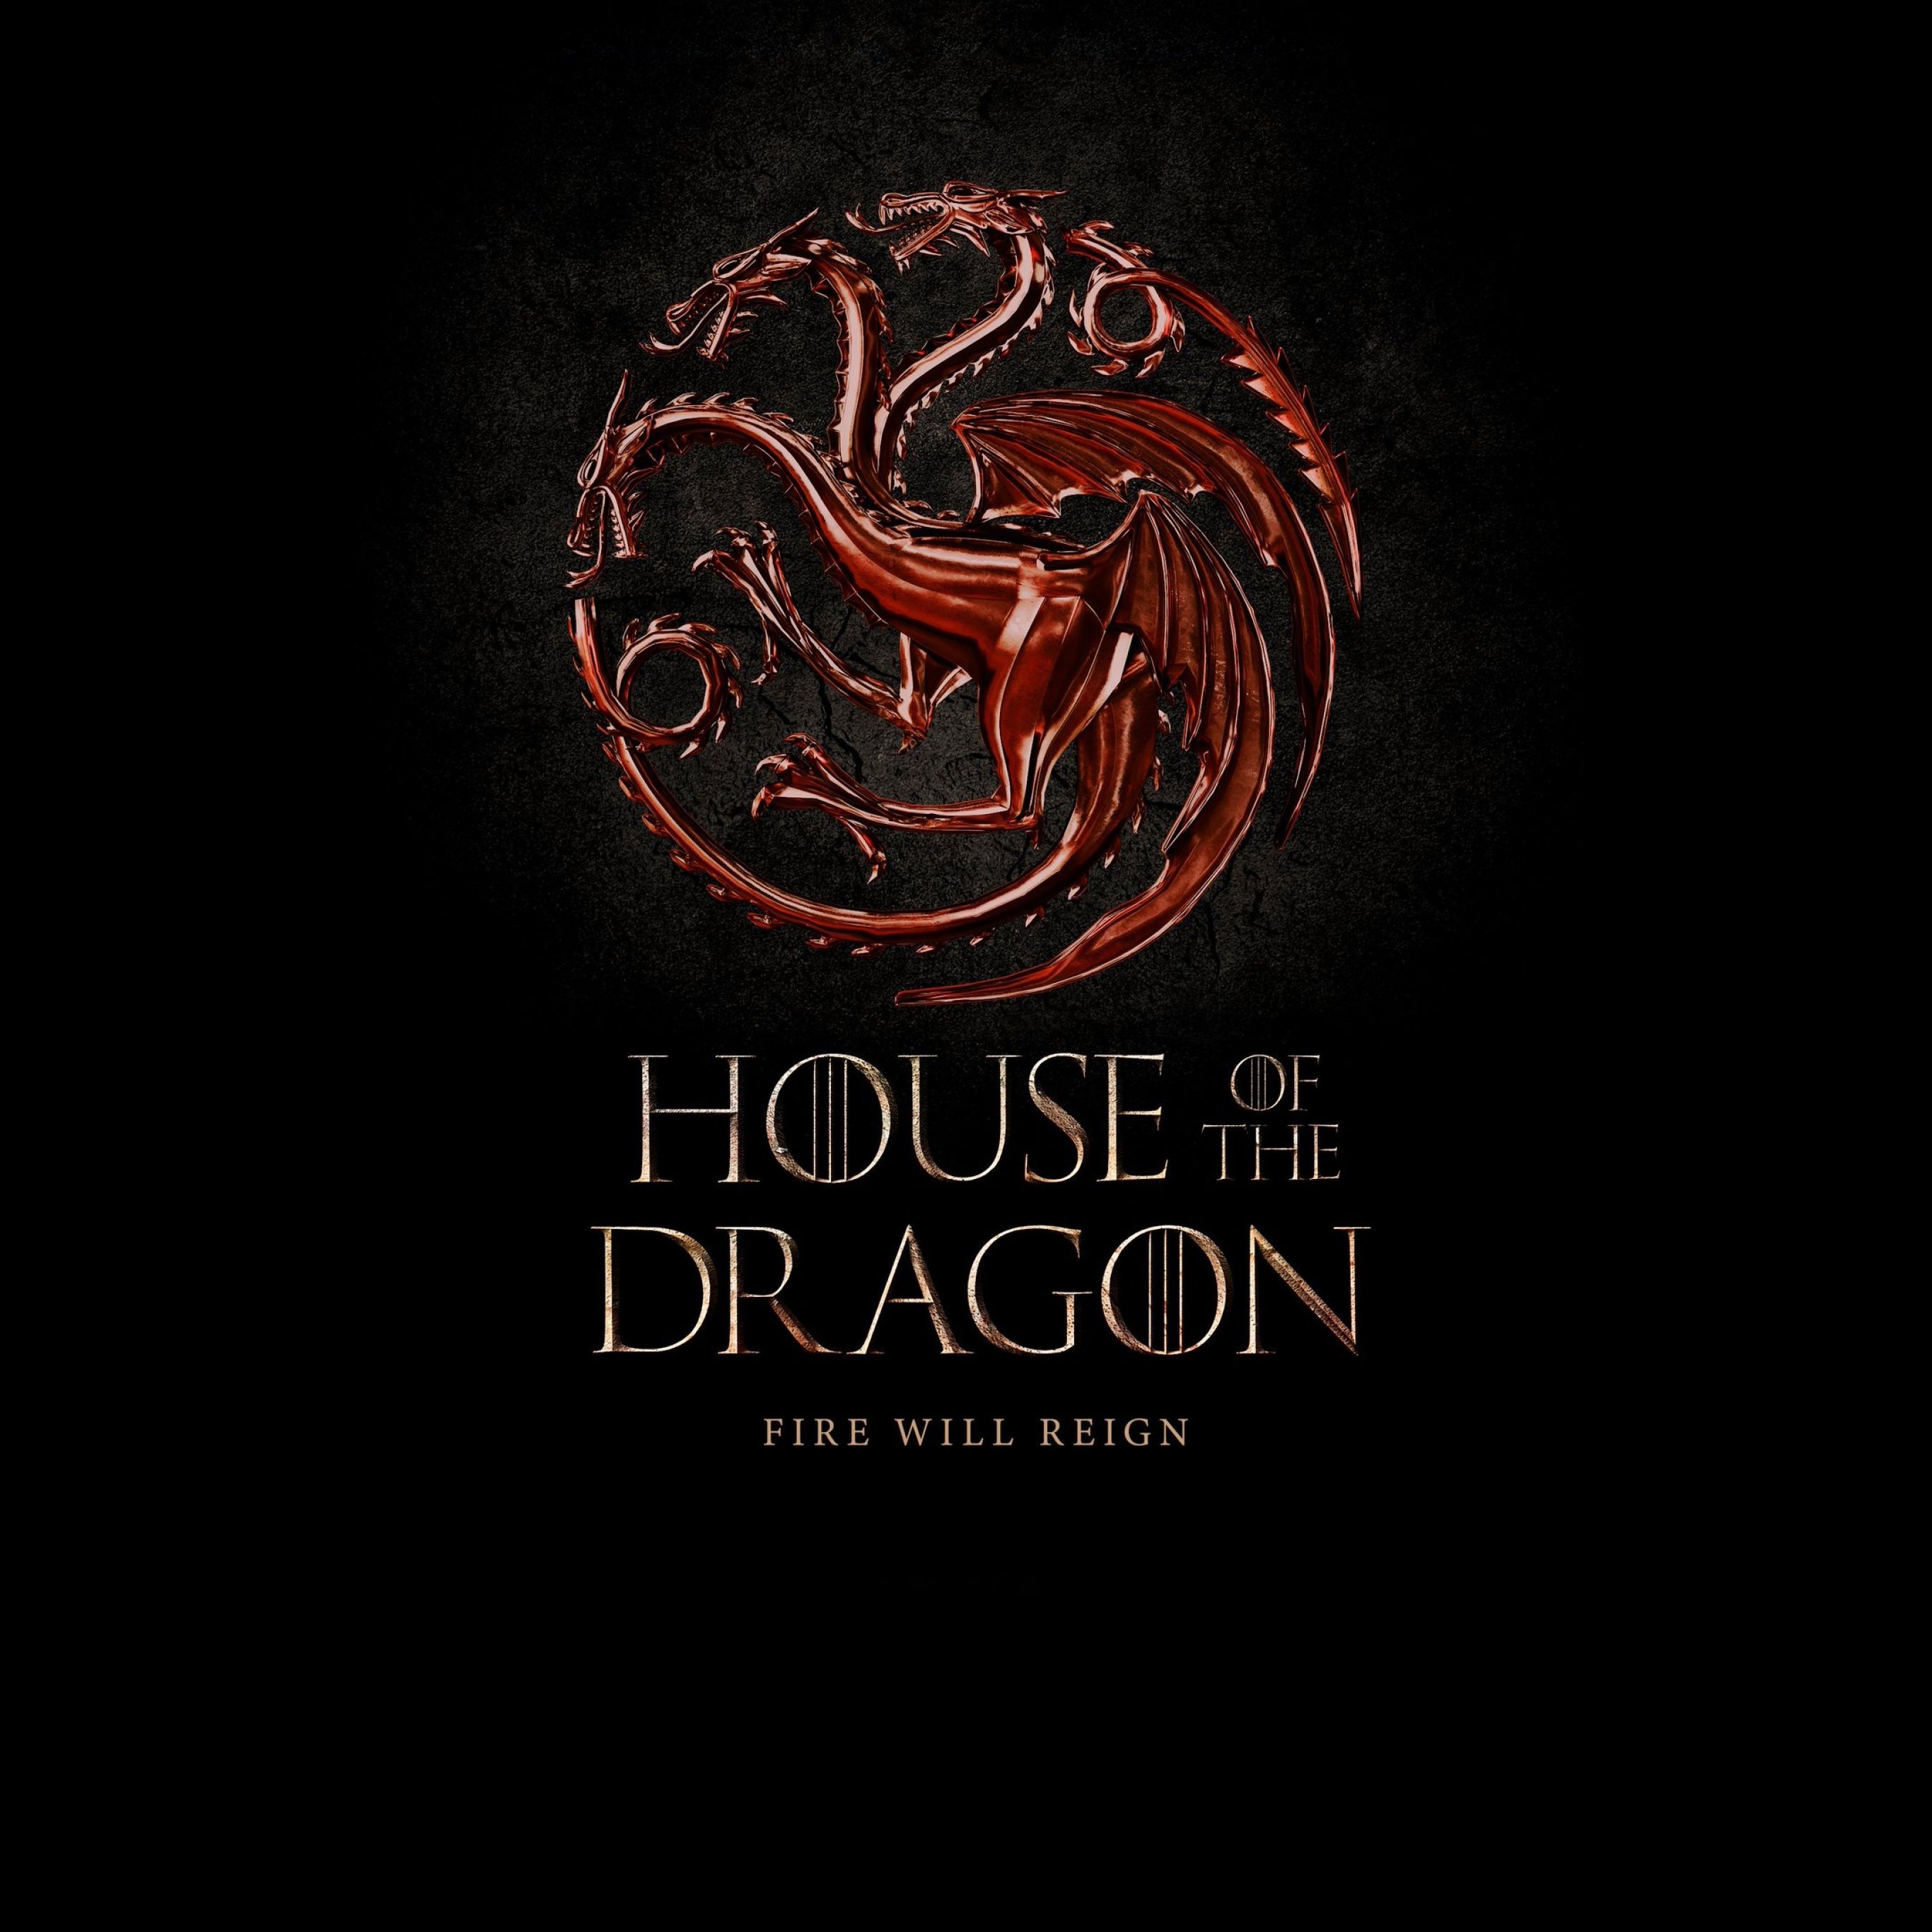 House of the dragon fire will reign - Dragon